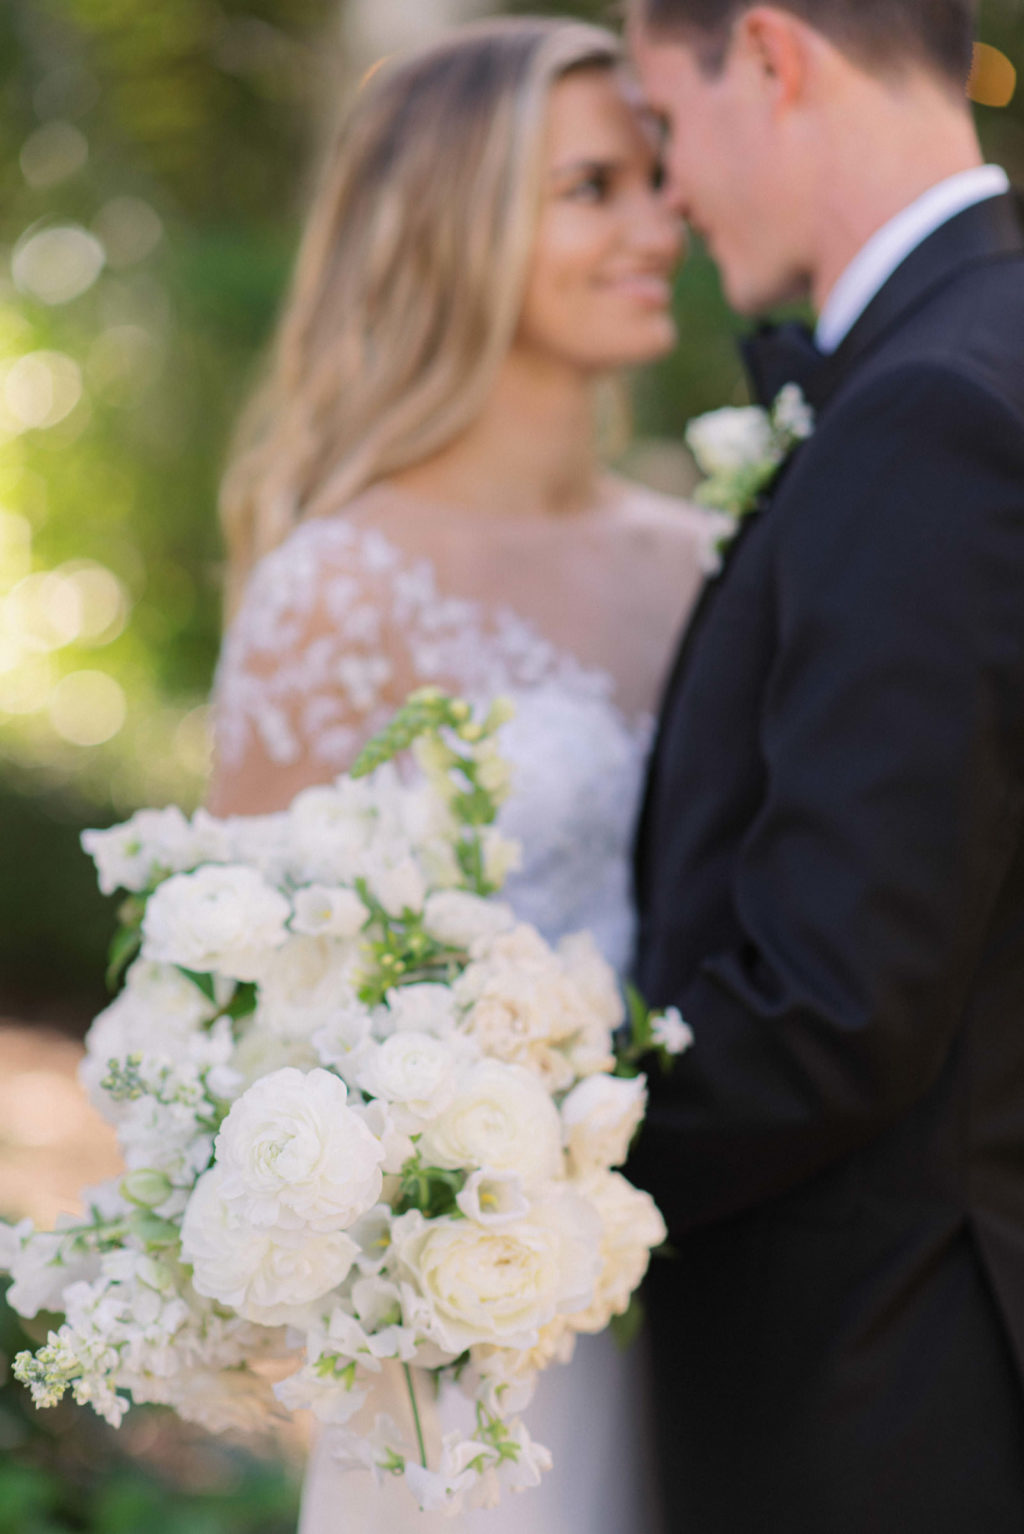 Florida Classic Groom and Bride Holding White Roses and Floral Bouquet